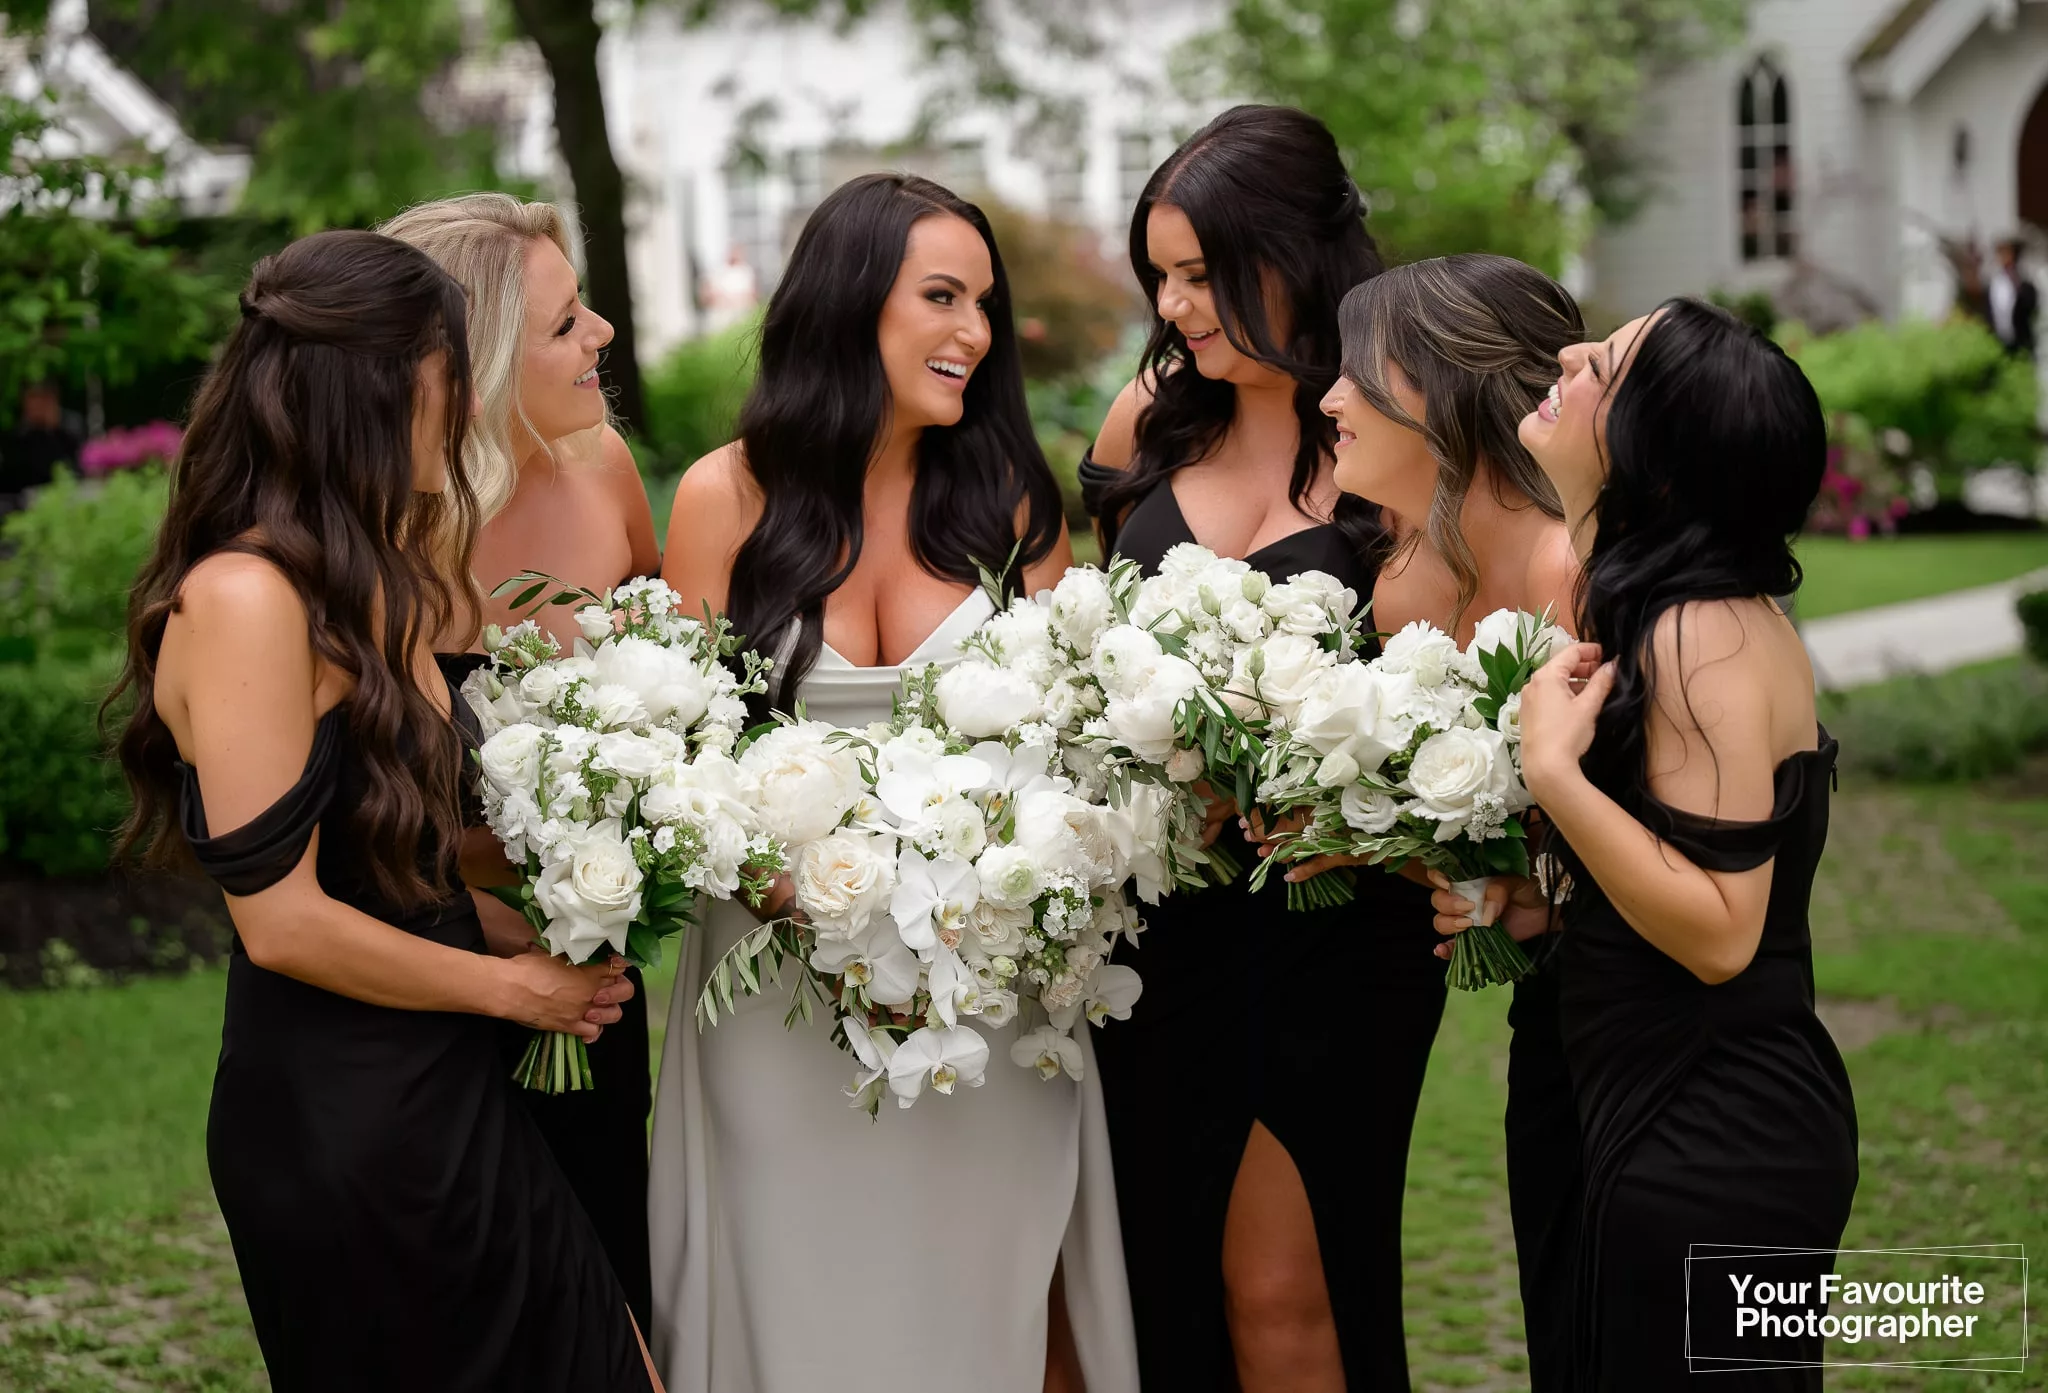 Bride with her bridesmaids in a black dresses and white flowers at The Doctor's House